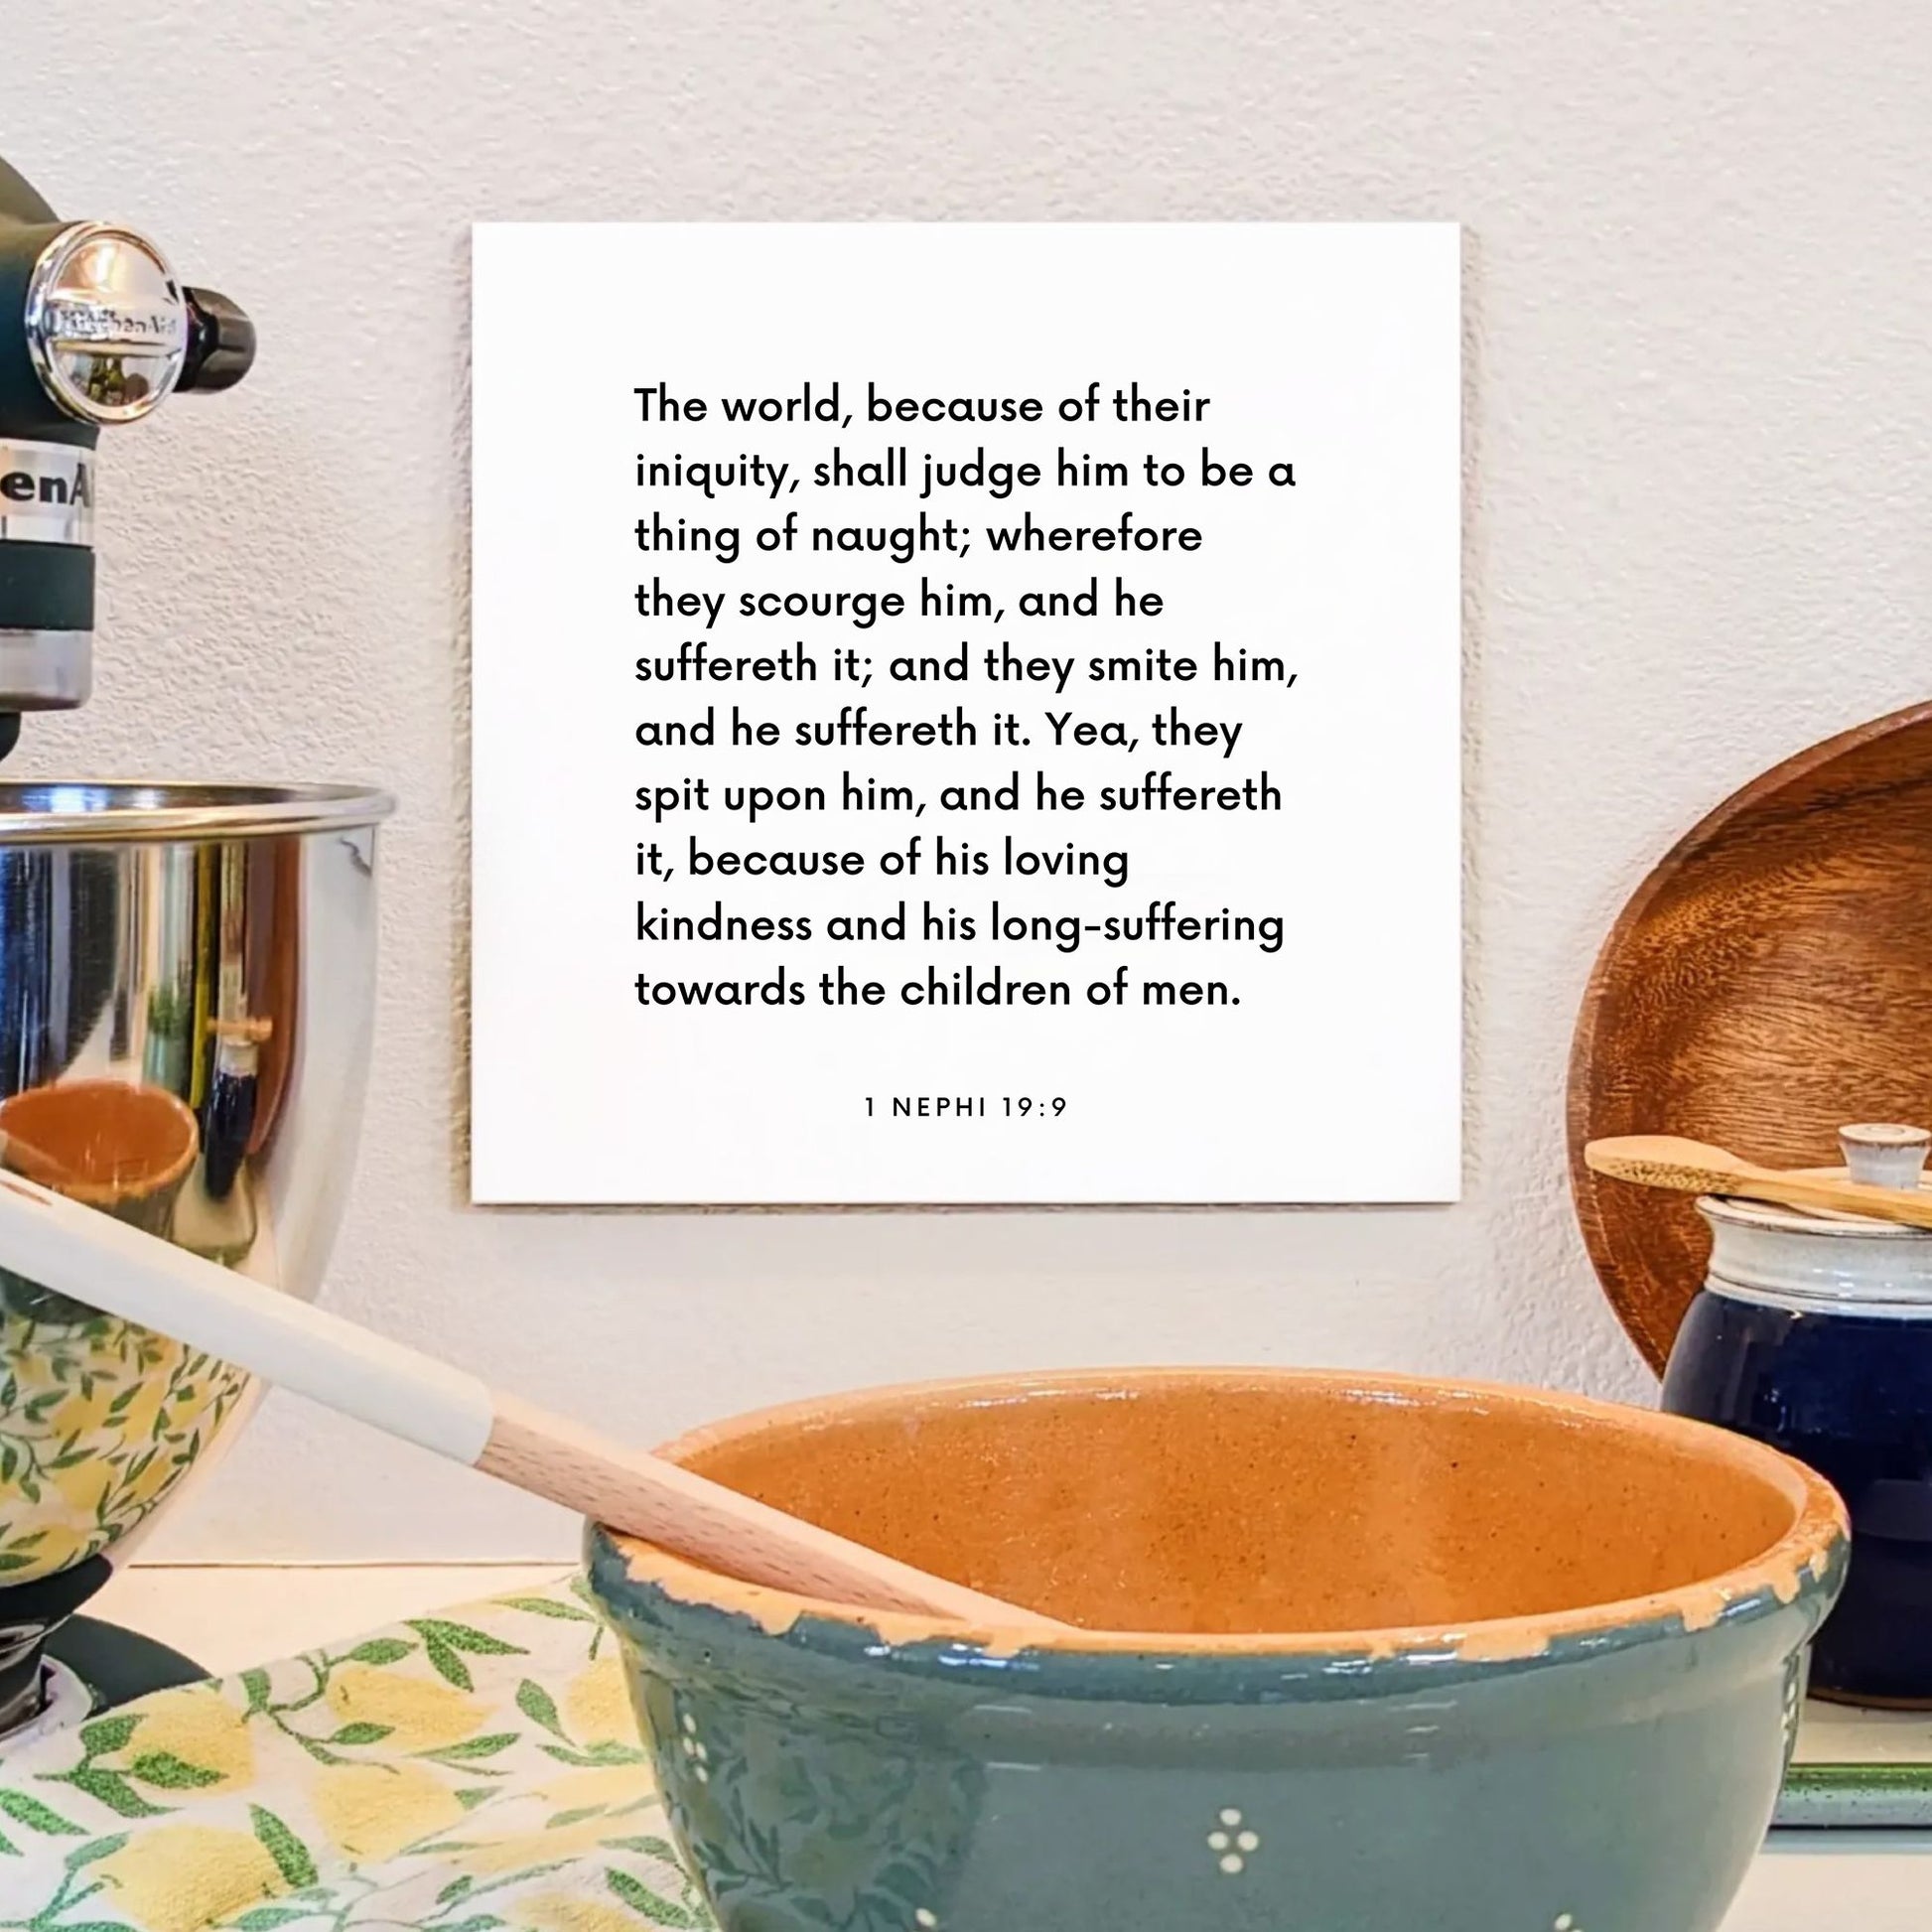 Kitchen mouting of the scripture tile for 1 Nephi 19:9 - "Because of his loving kindness and his long-suffering"